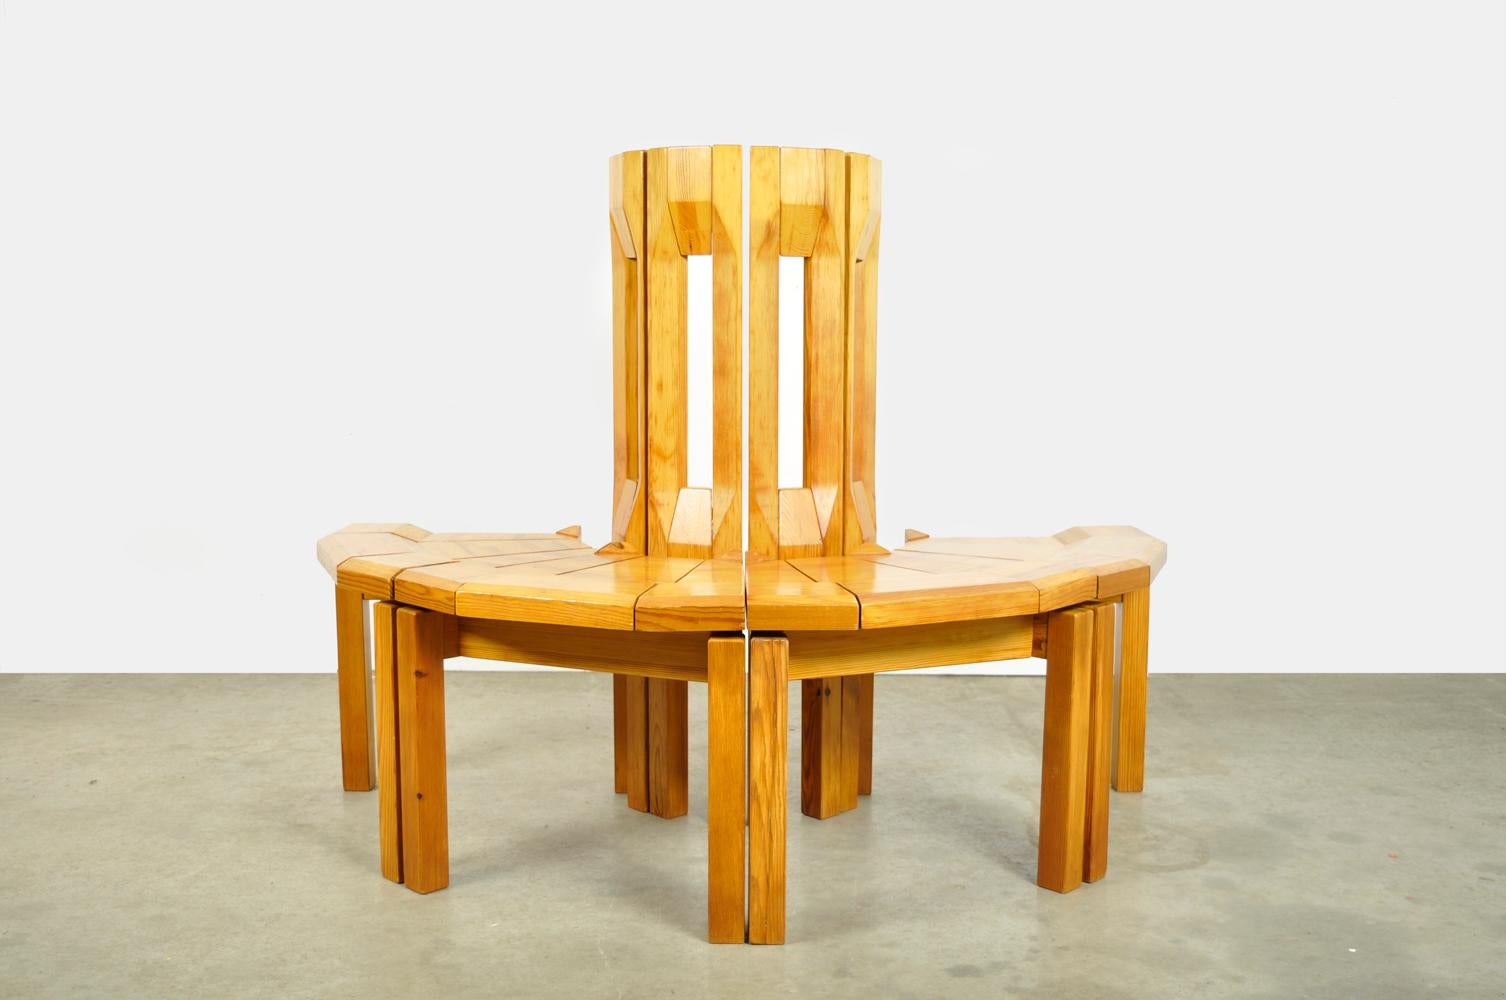 Finnish Pine Dining Chairs “Rantasipi” by Arnold Lerber for Laukaan Puu, Finland, 1970s For Sale